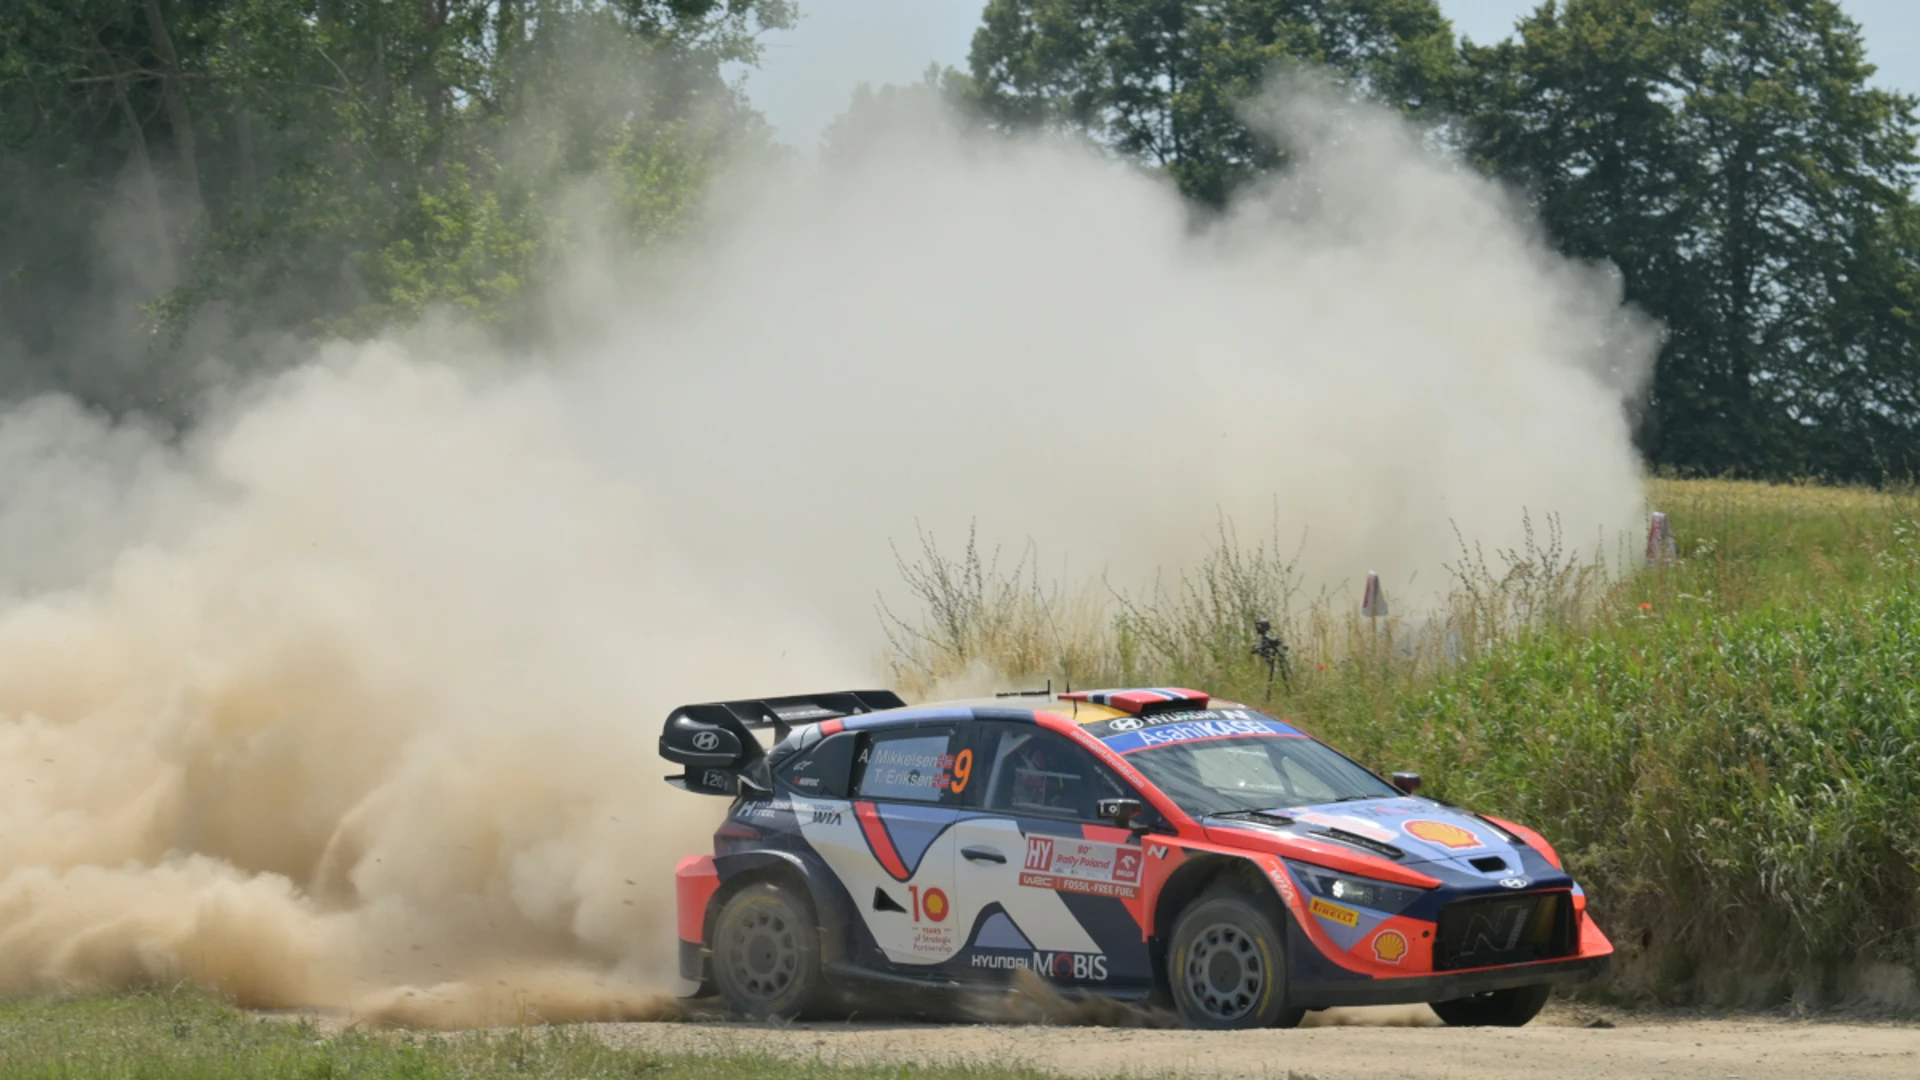 Mikkelsen leads in Poland with Rovanpera close behind